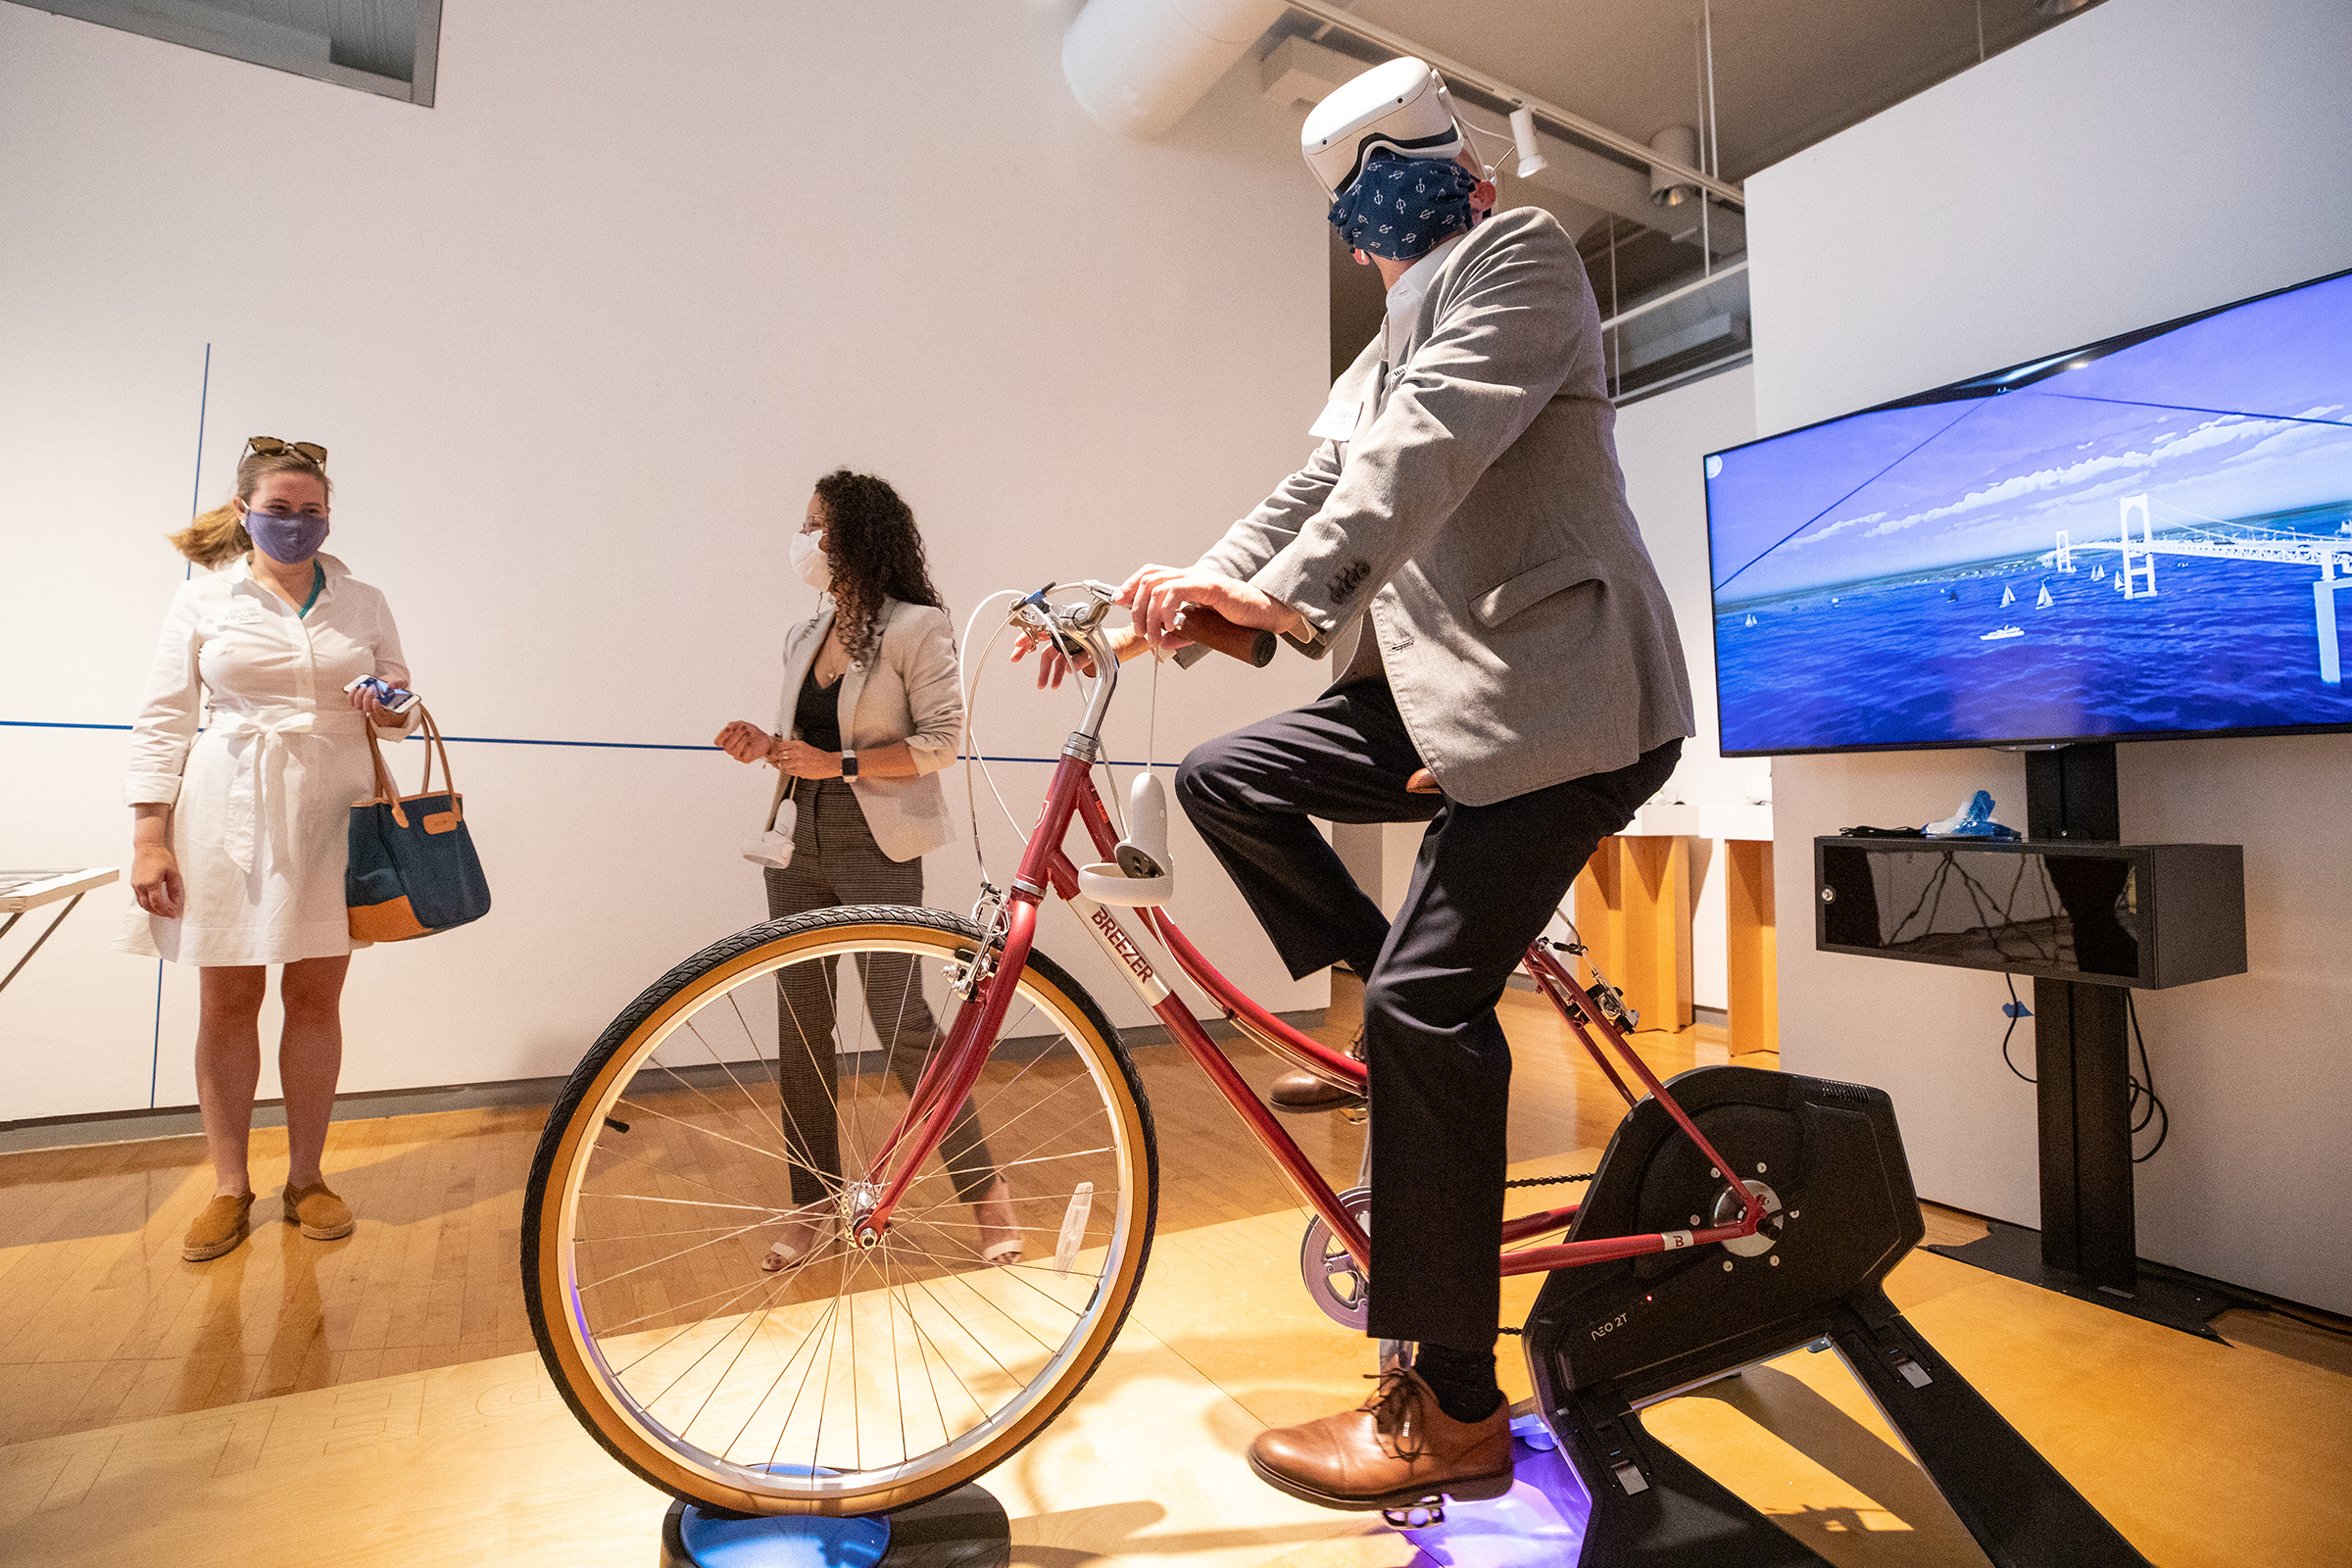 a visitor tries out VR goggles while riding a stationary bicycle